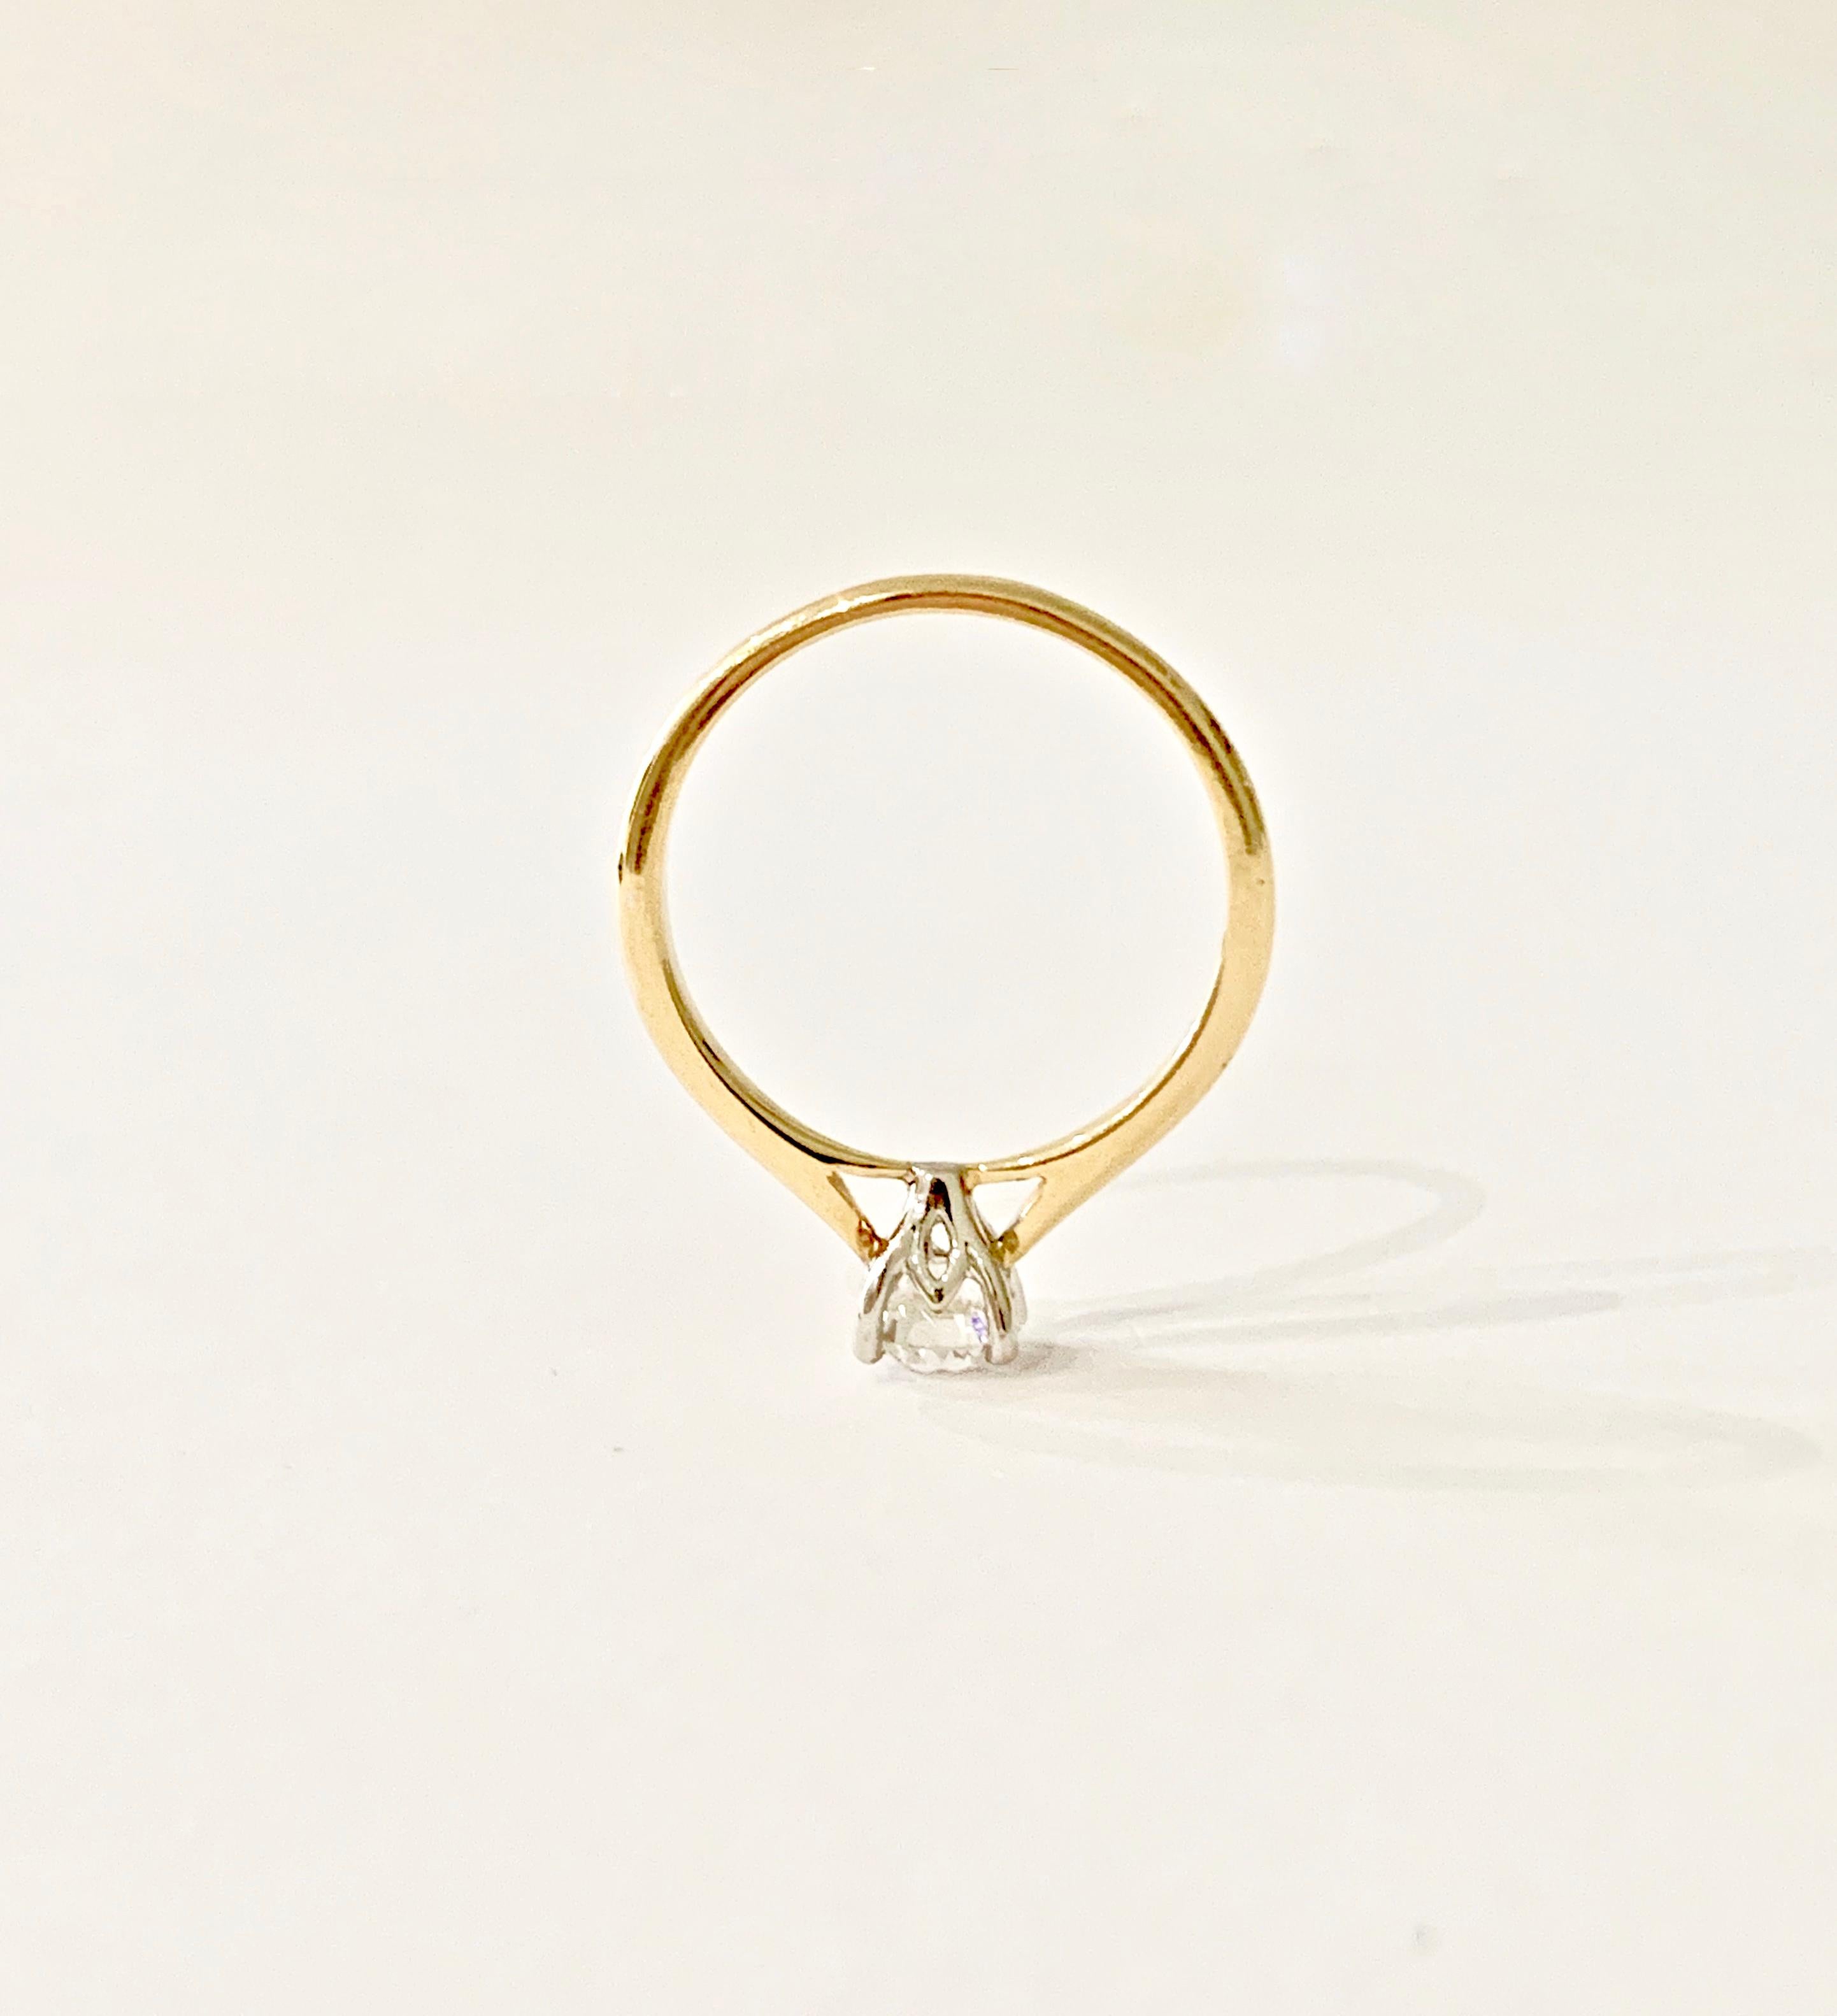 Certified 0.53 Carat Old Cut Diamond Ring Set in 18 Carat Yellow Gold For Sale 2